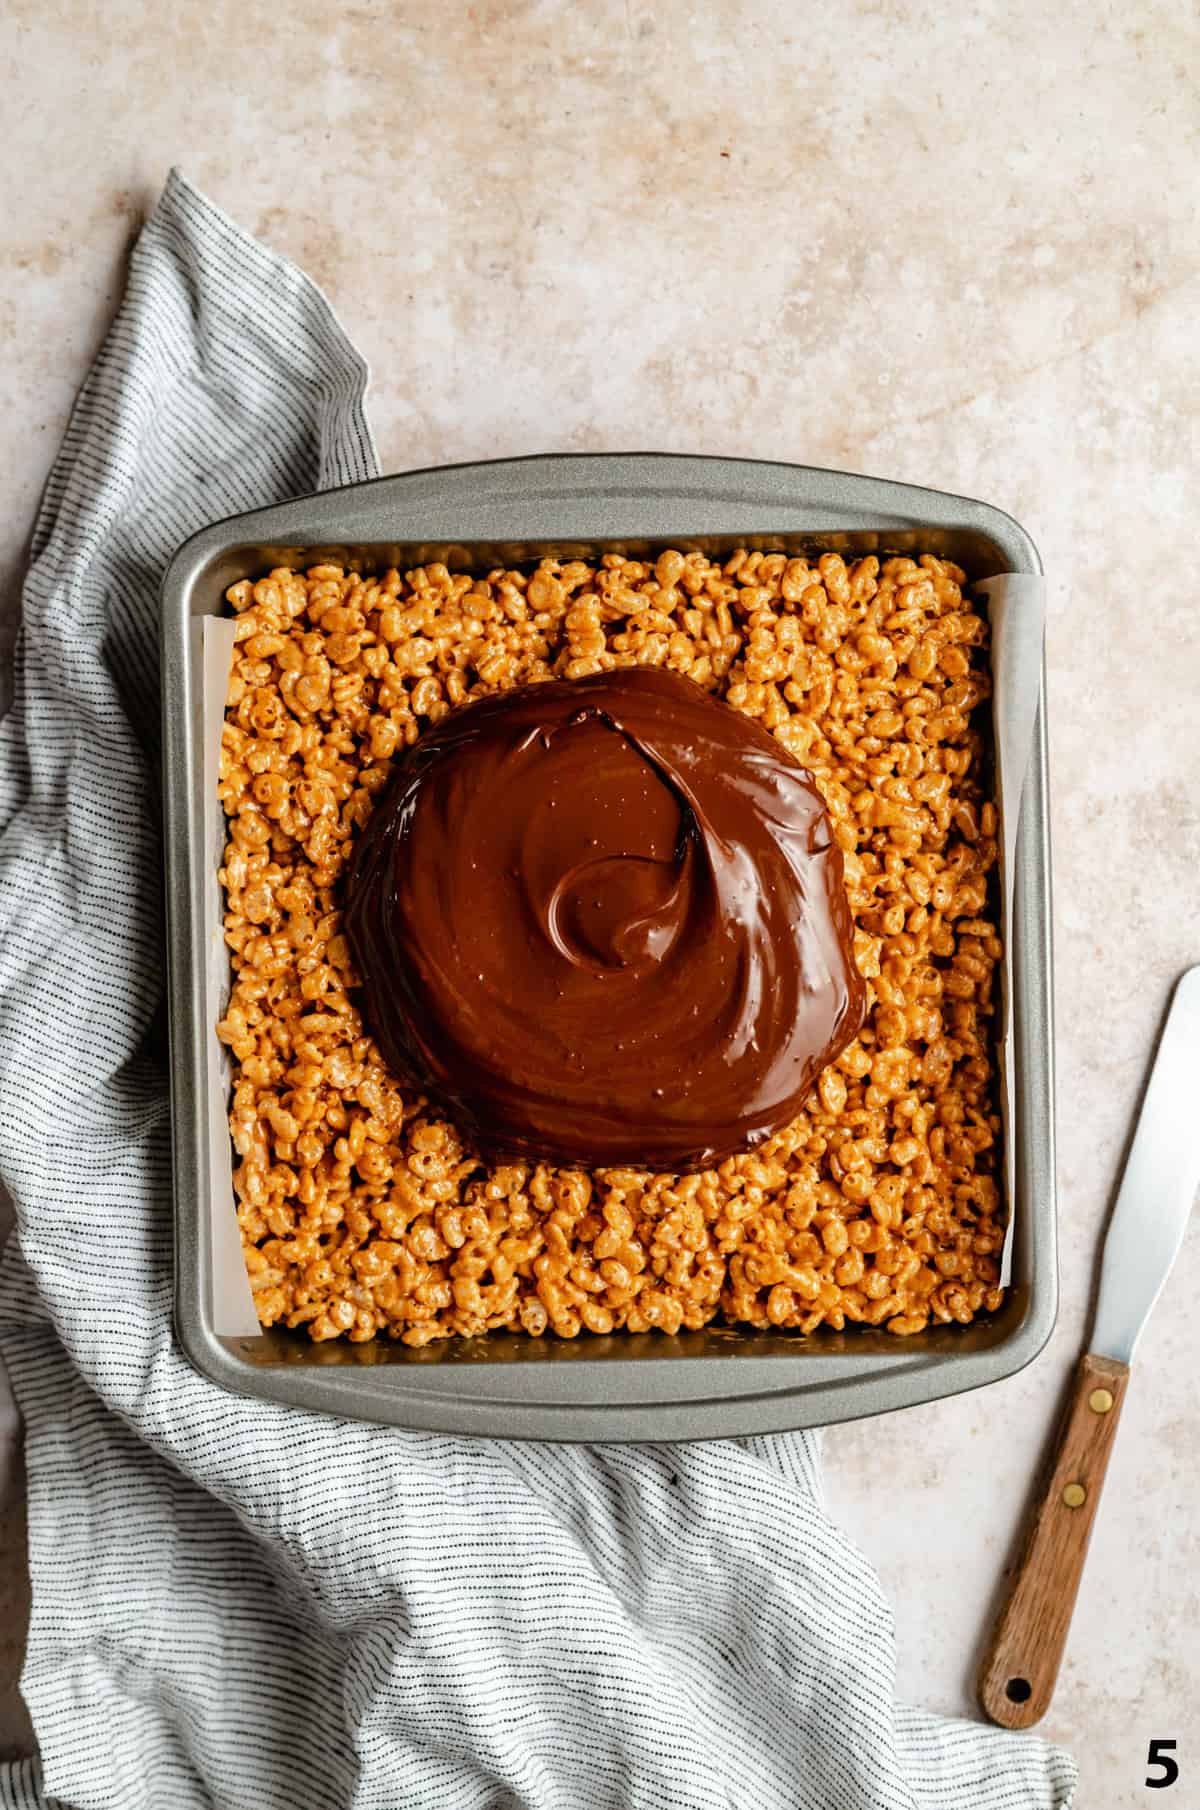 Rice krispie treats in a baking tin with melted chocolate mix on top being spread out.